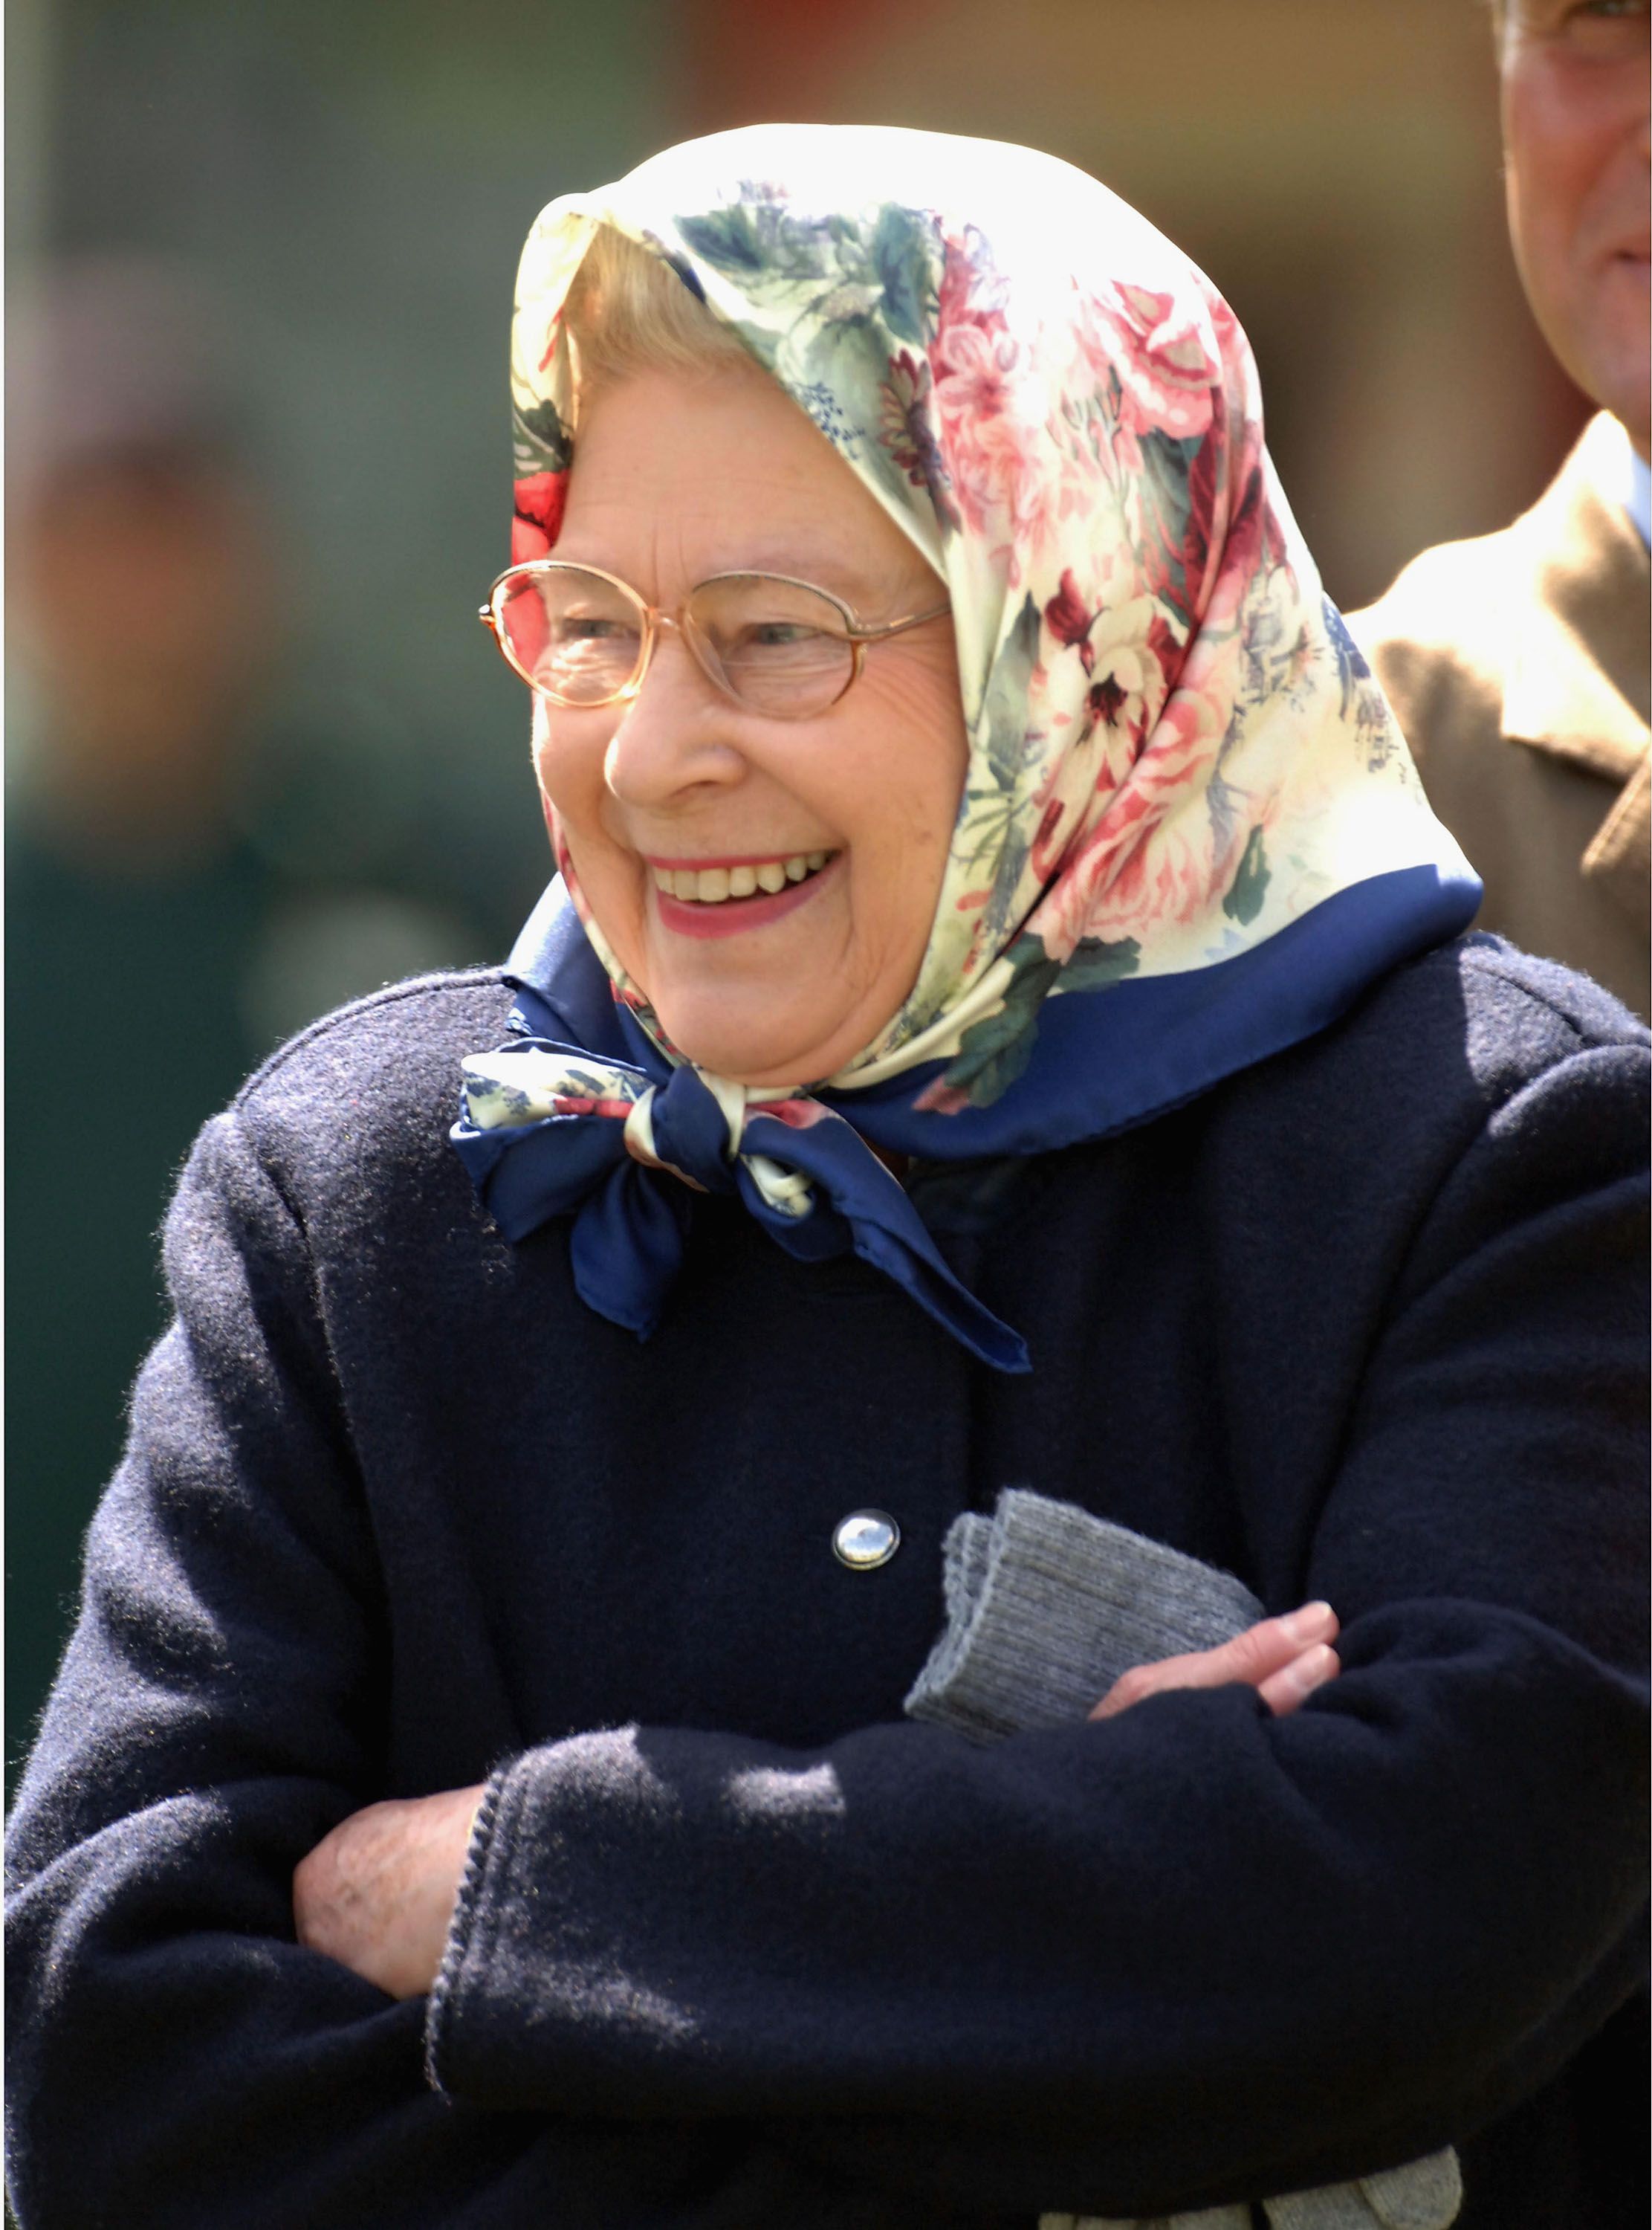 The Queen's Most Royal Accessory: Her Headscarf